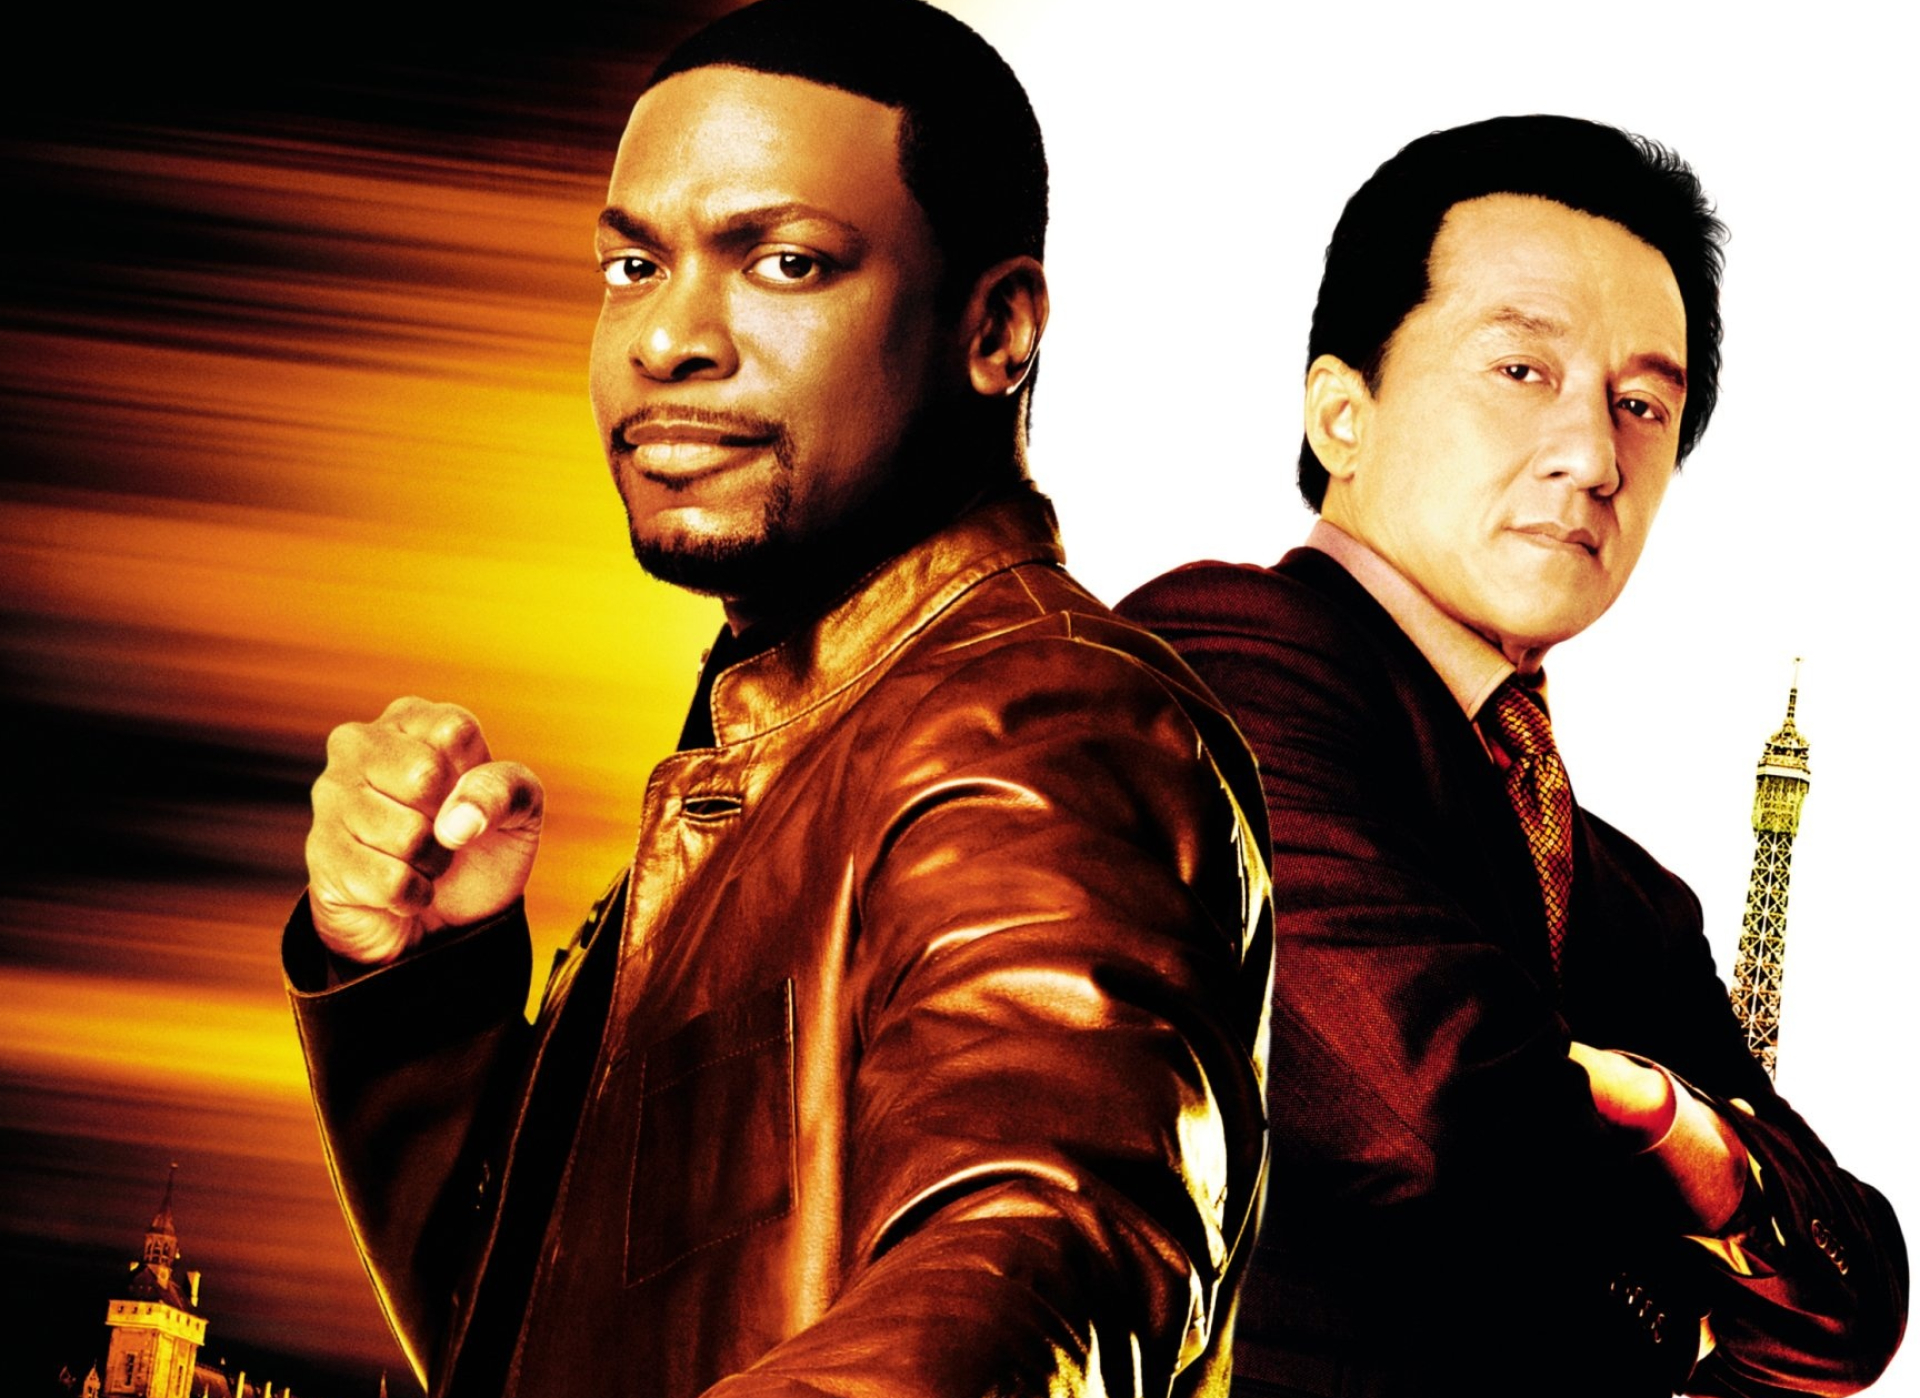 Rush Hour, Explosive car chases, Neon-lit streets, Dynamic cinematography, 1920x1400 HD Desktop